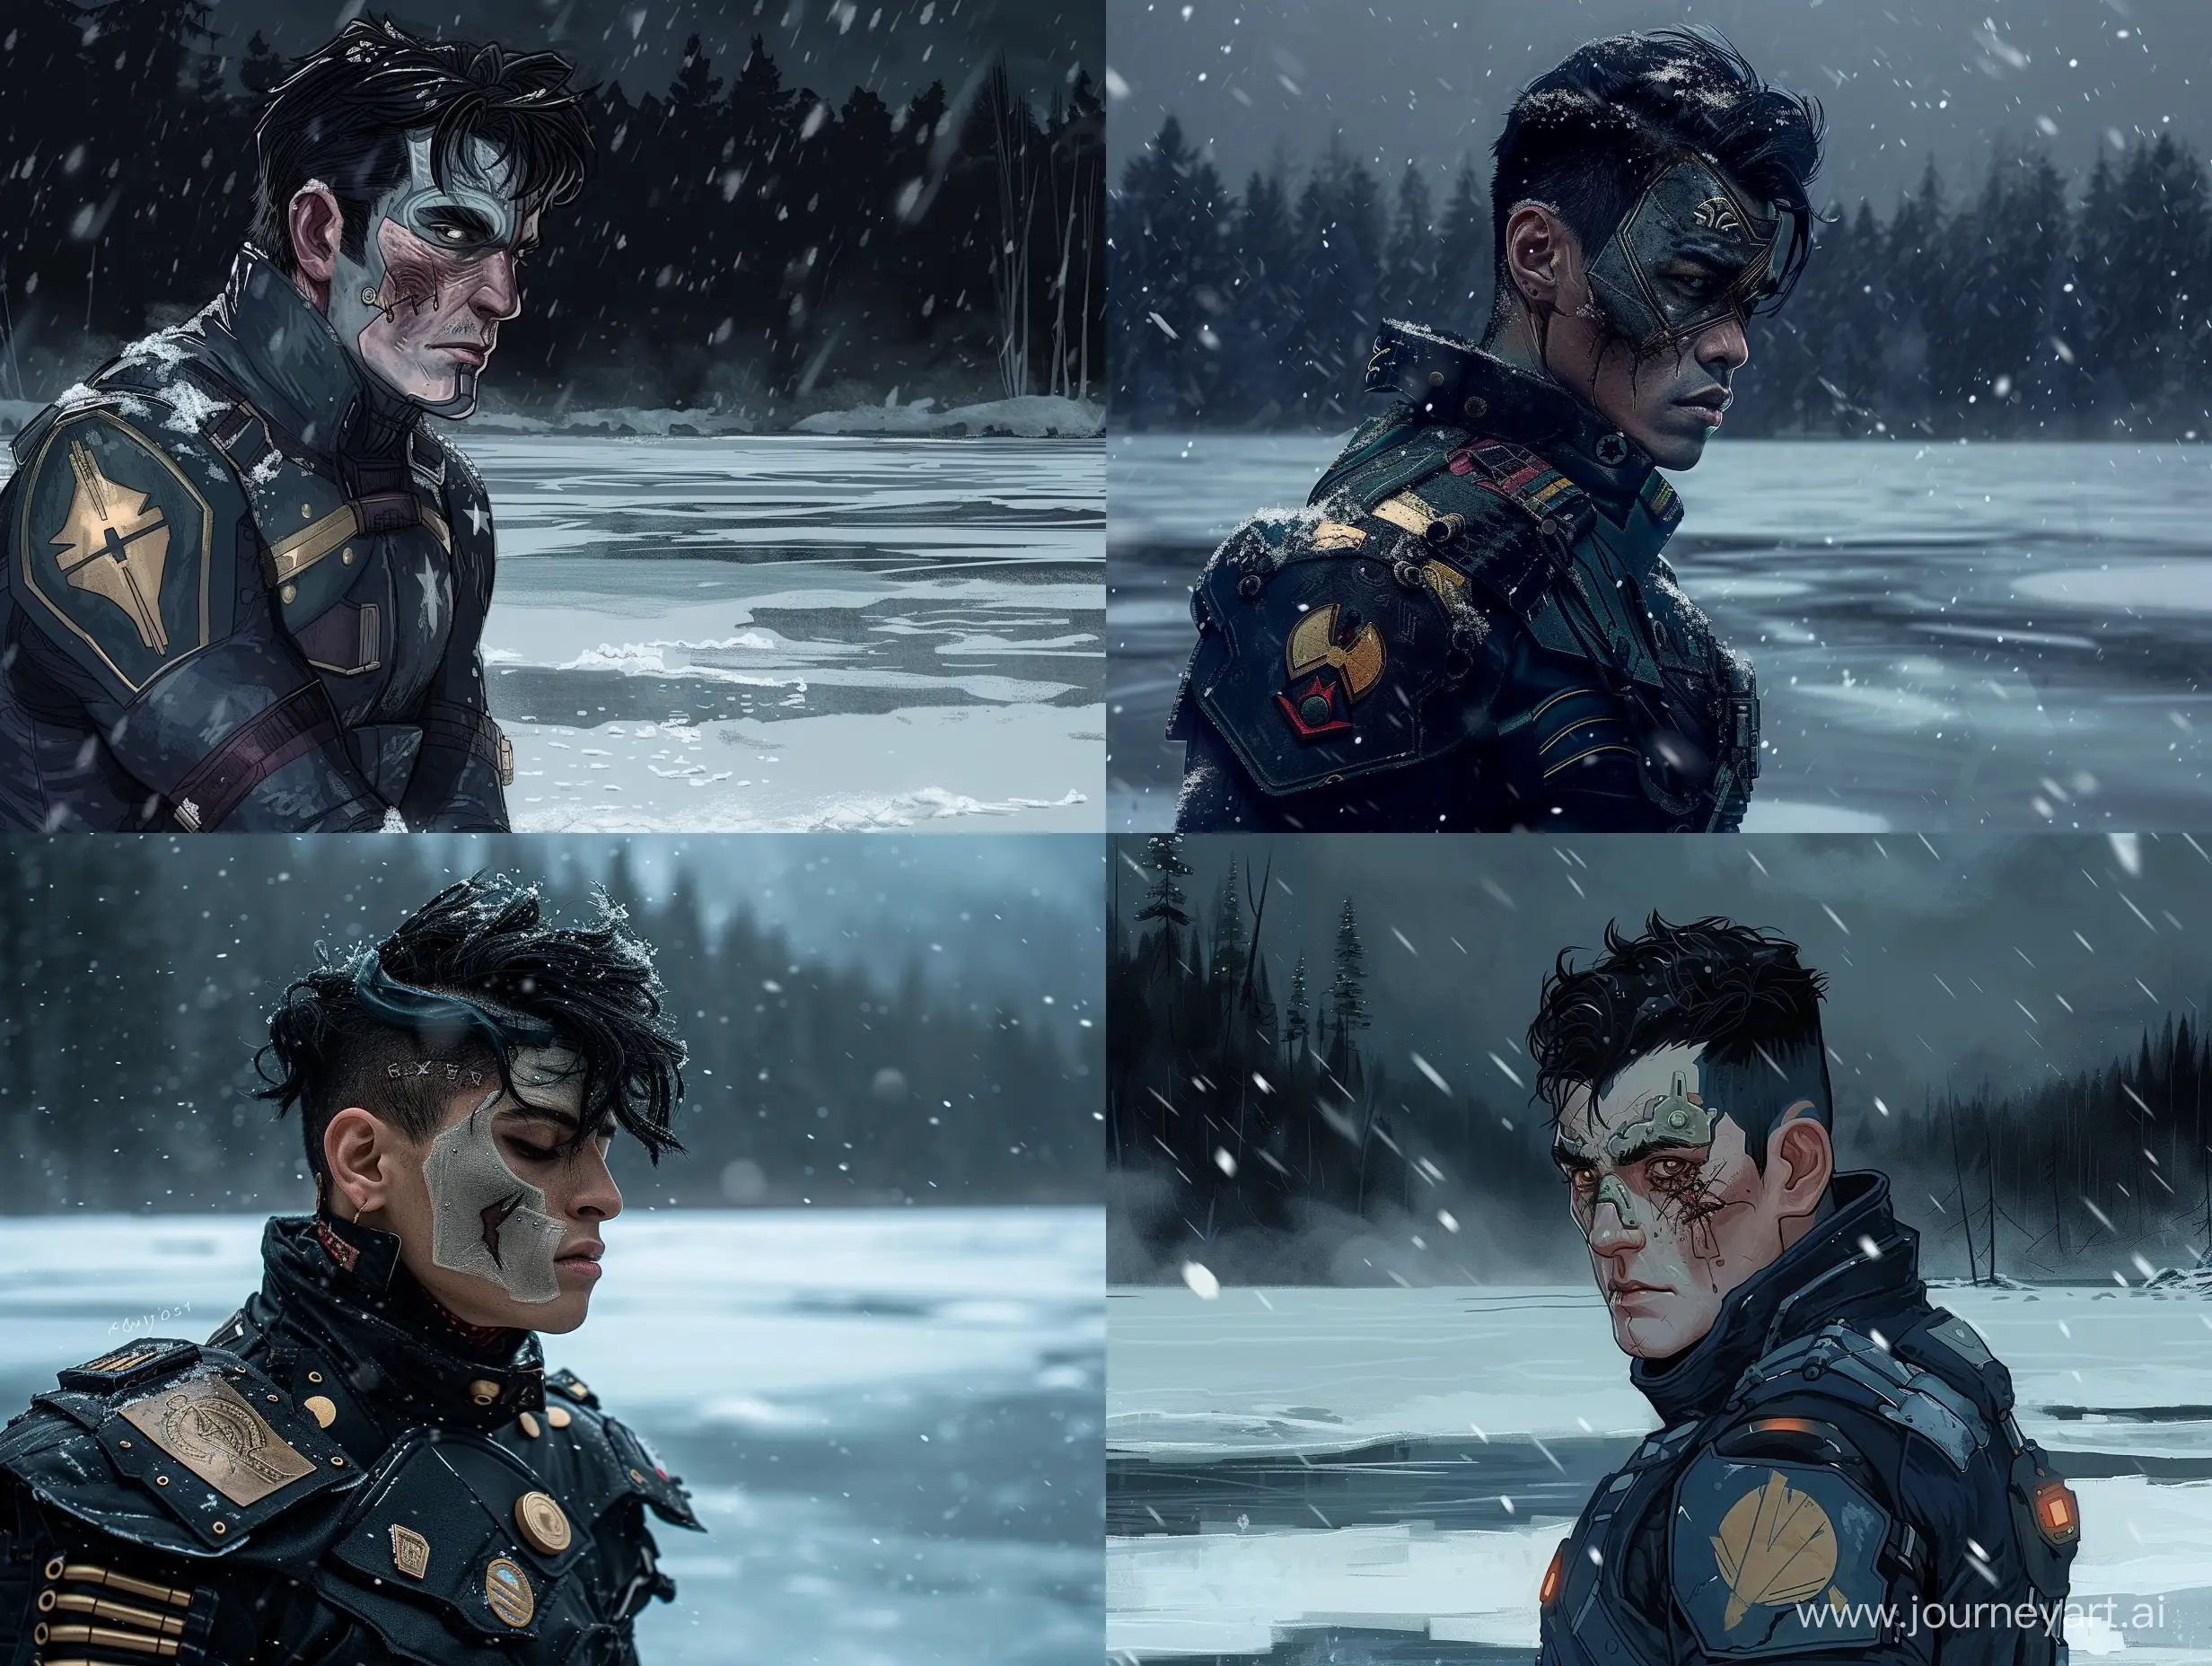 marvel comics style, man with black hair, scar on face, sci fi uniform, half ancient mask on face,  , on an icy lake, dark forest in the background, snowstorm, 